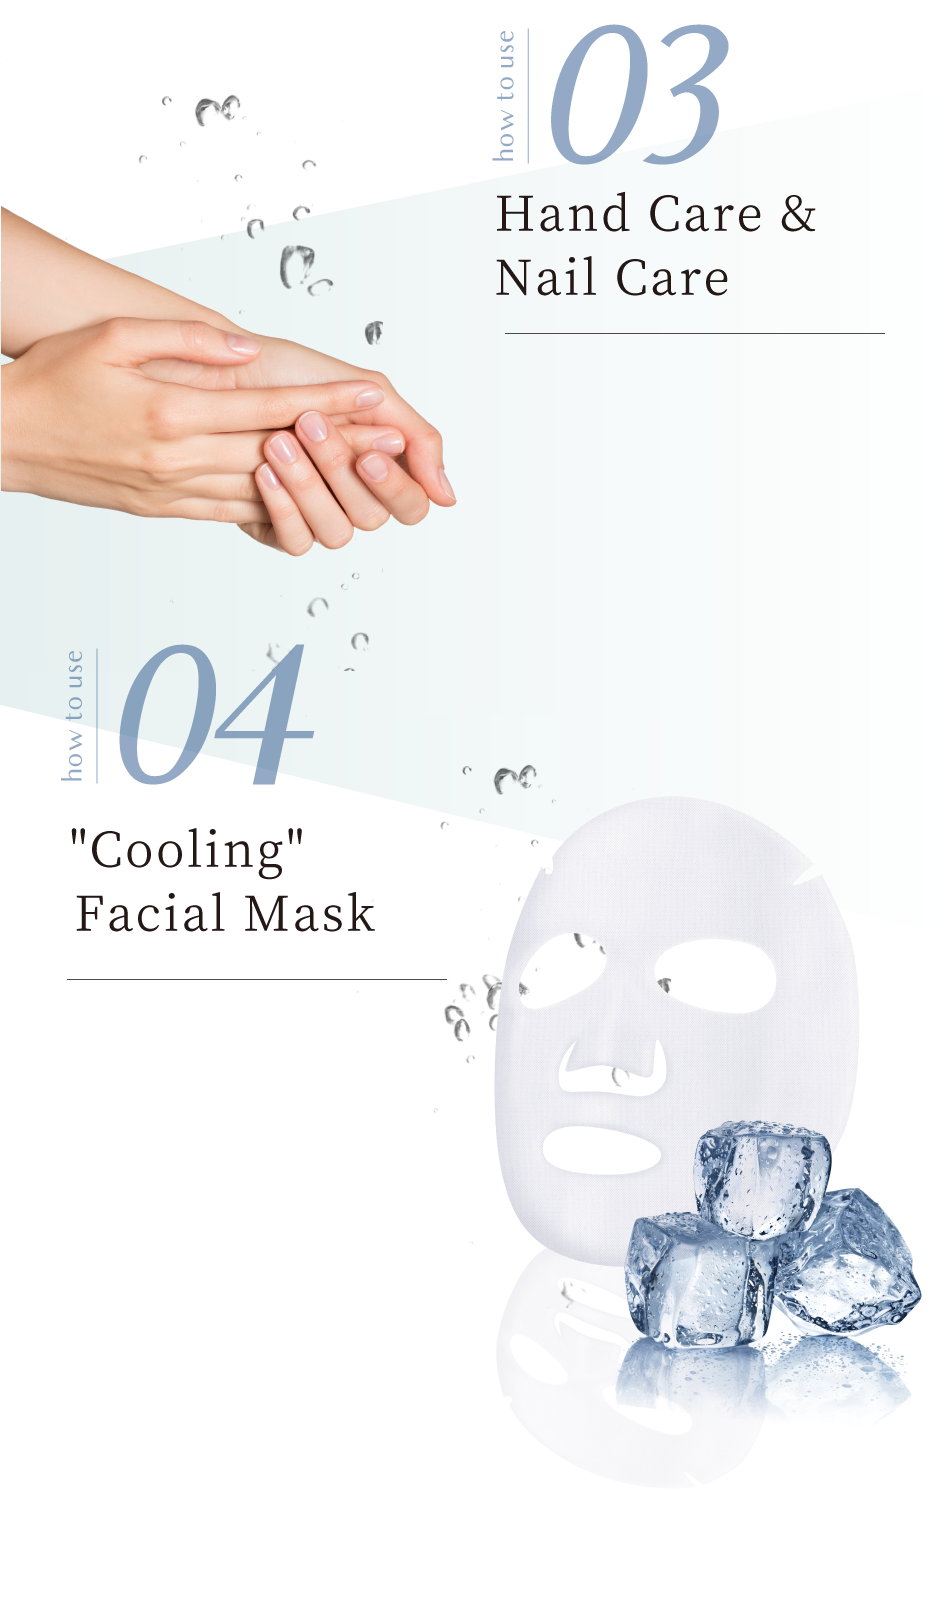 how to use 03 Hand Care & Nail Care how to use 04 'Cooling' Facial Mask